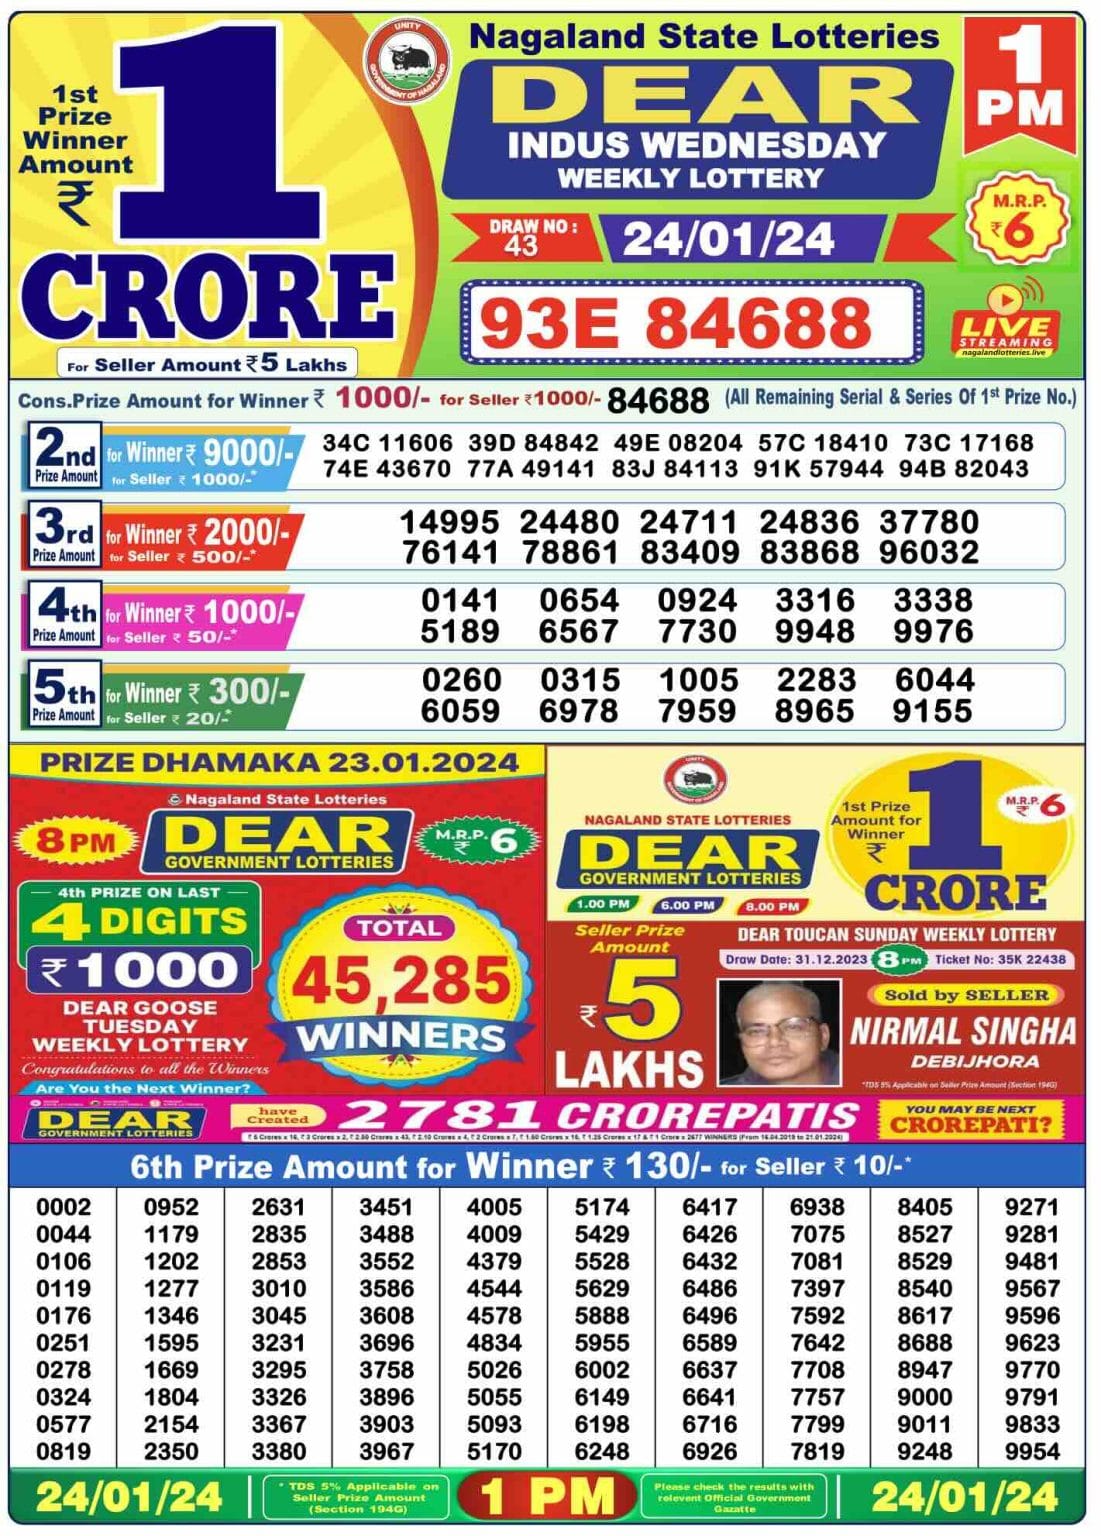 Dear lottery 1 PM Results 24.01.2024 All State Lottery Result